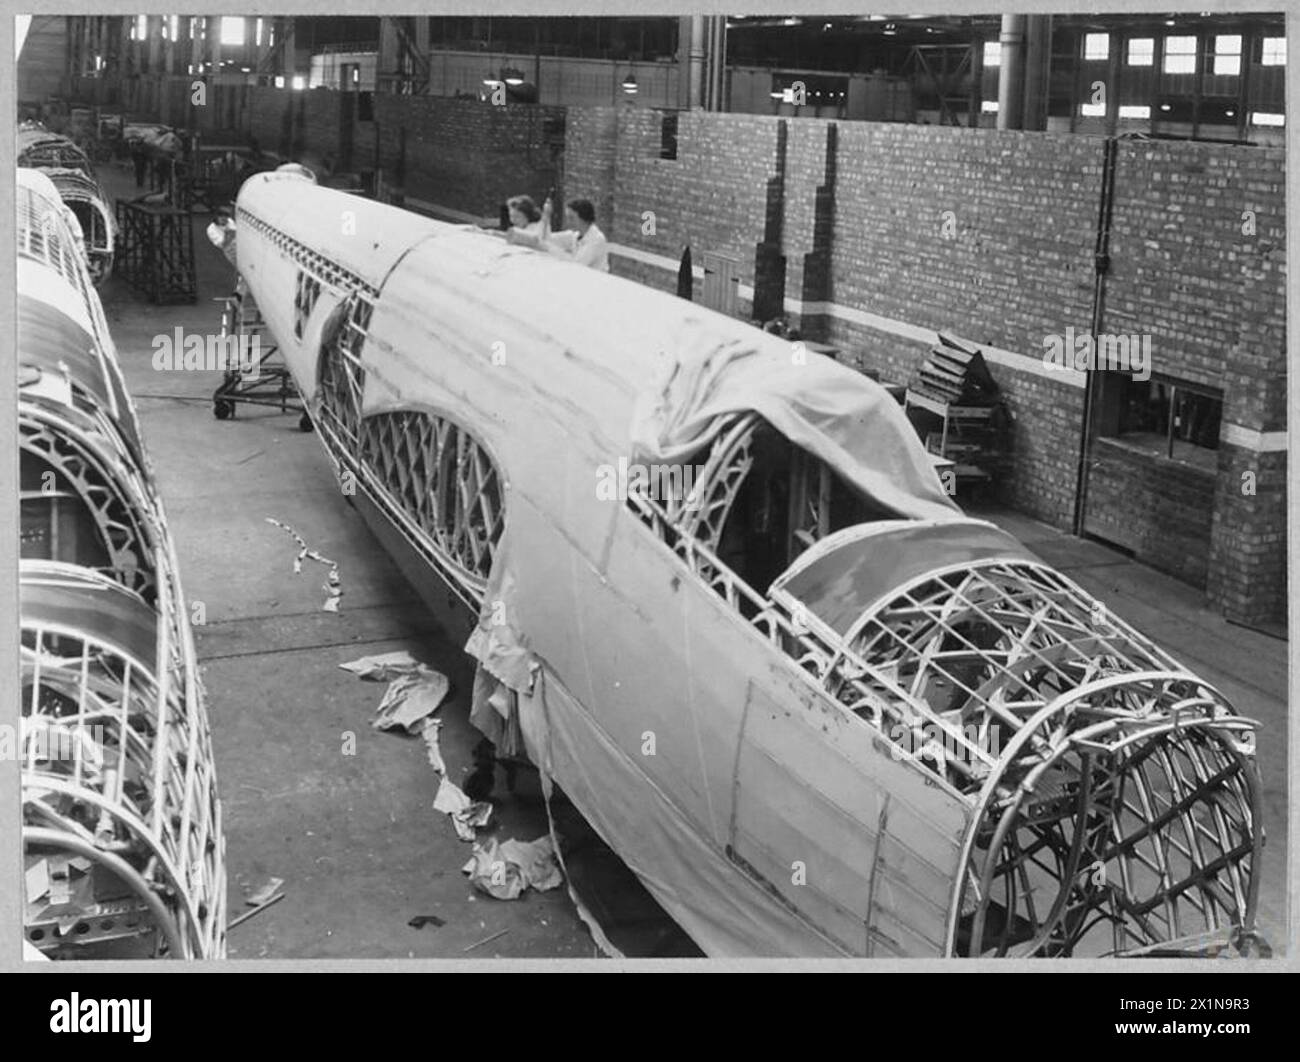 BRITAIN'S RECORD AIRCRAFT PRODUCTION ASSEMBLY OF 'WELLINGTON' BOMBERS - Last touches before testing, Royal Air Force Stock Photo